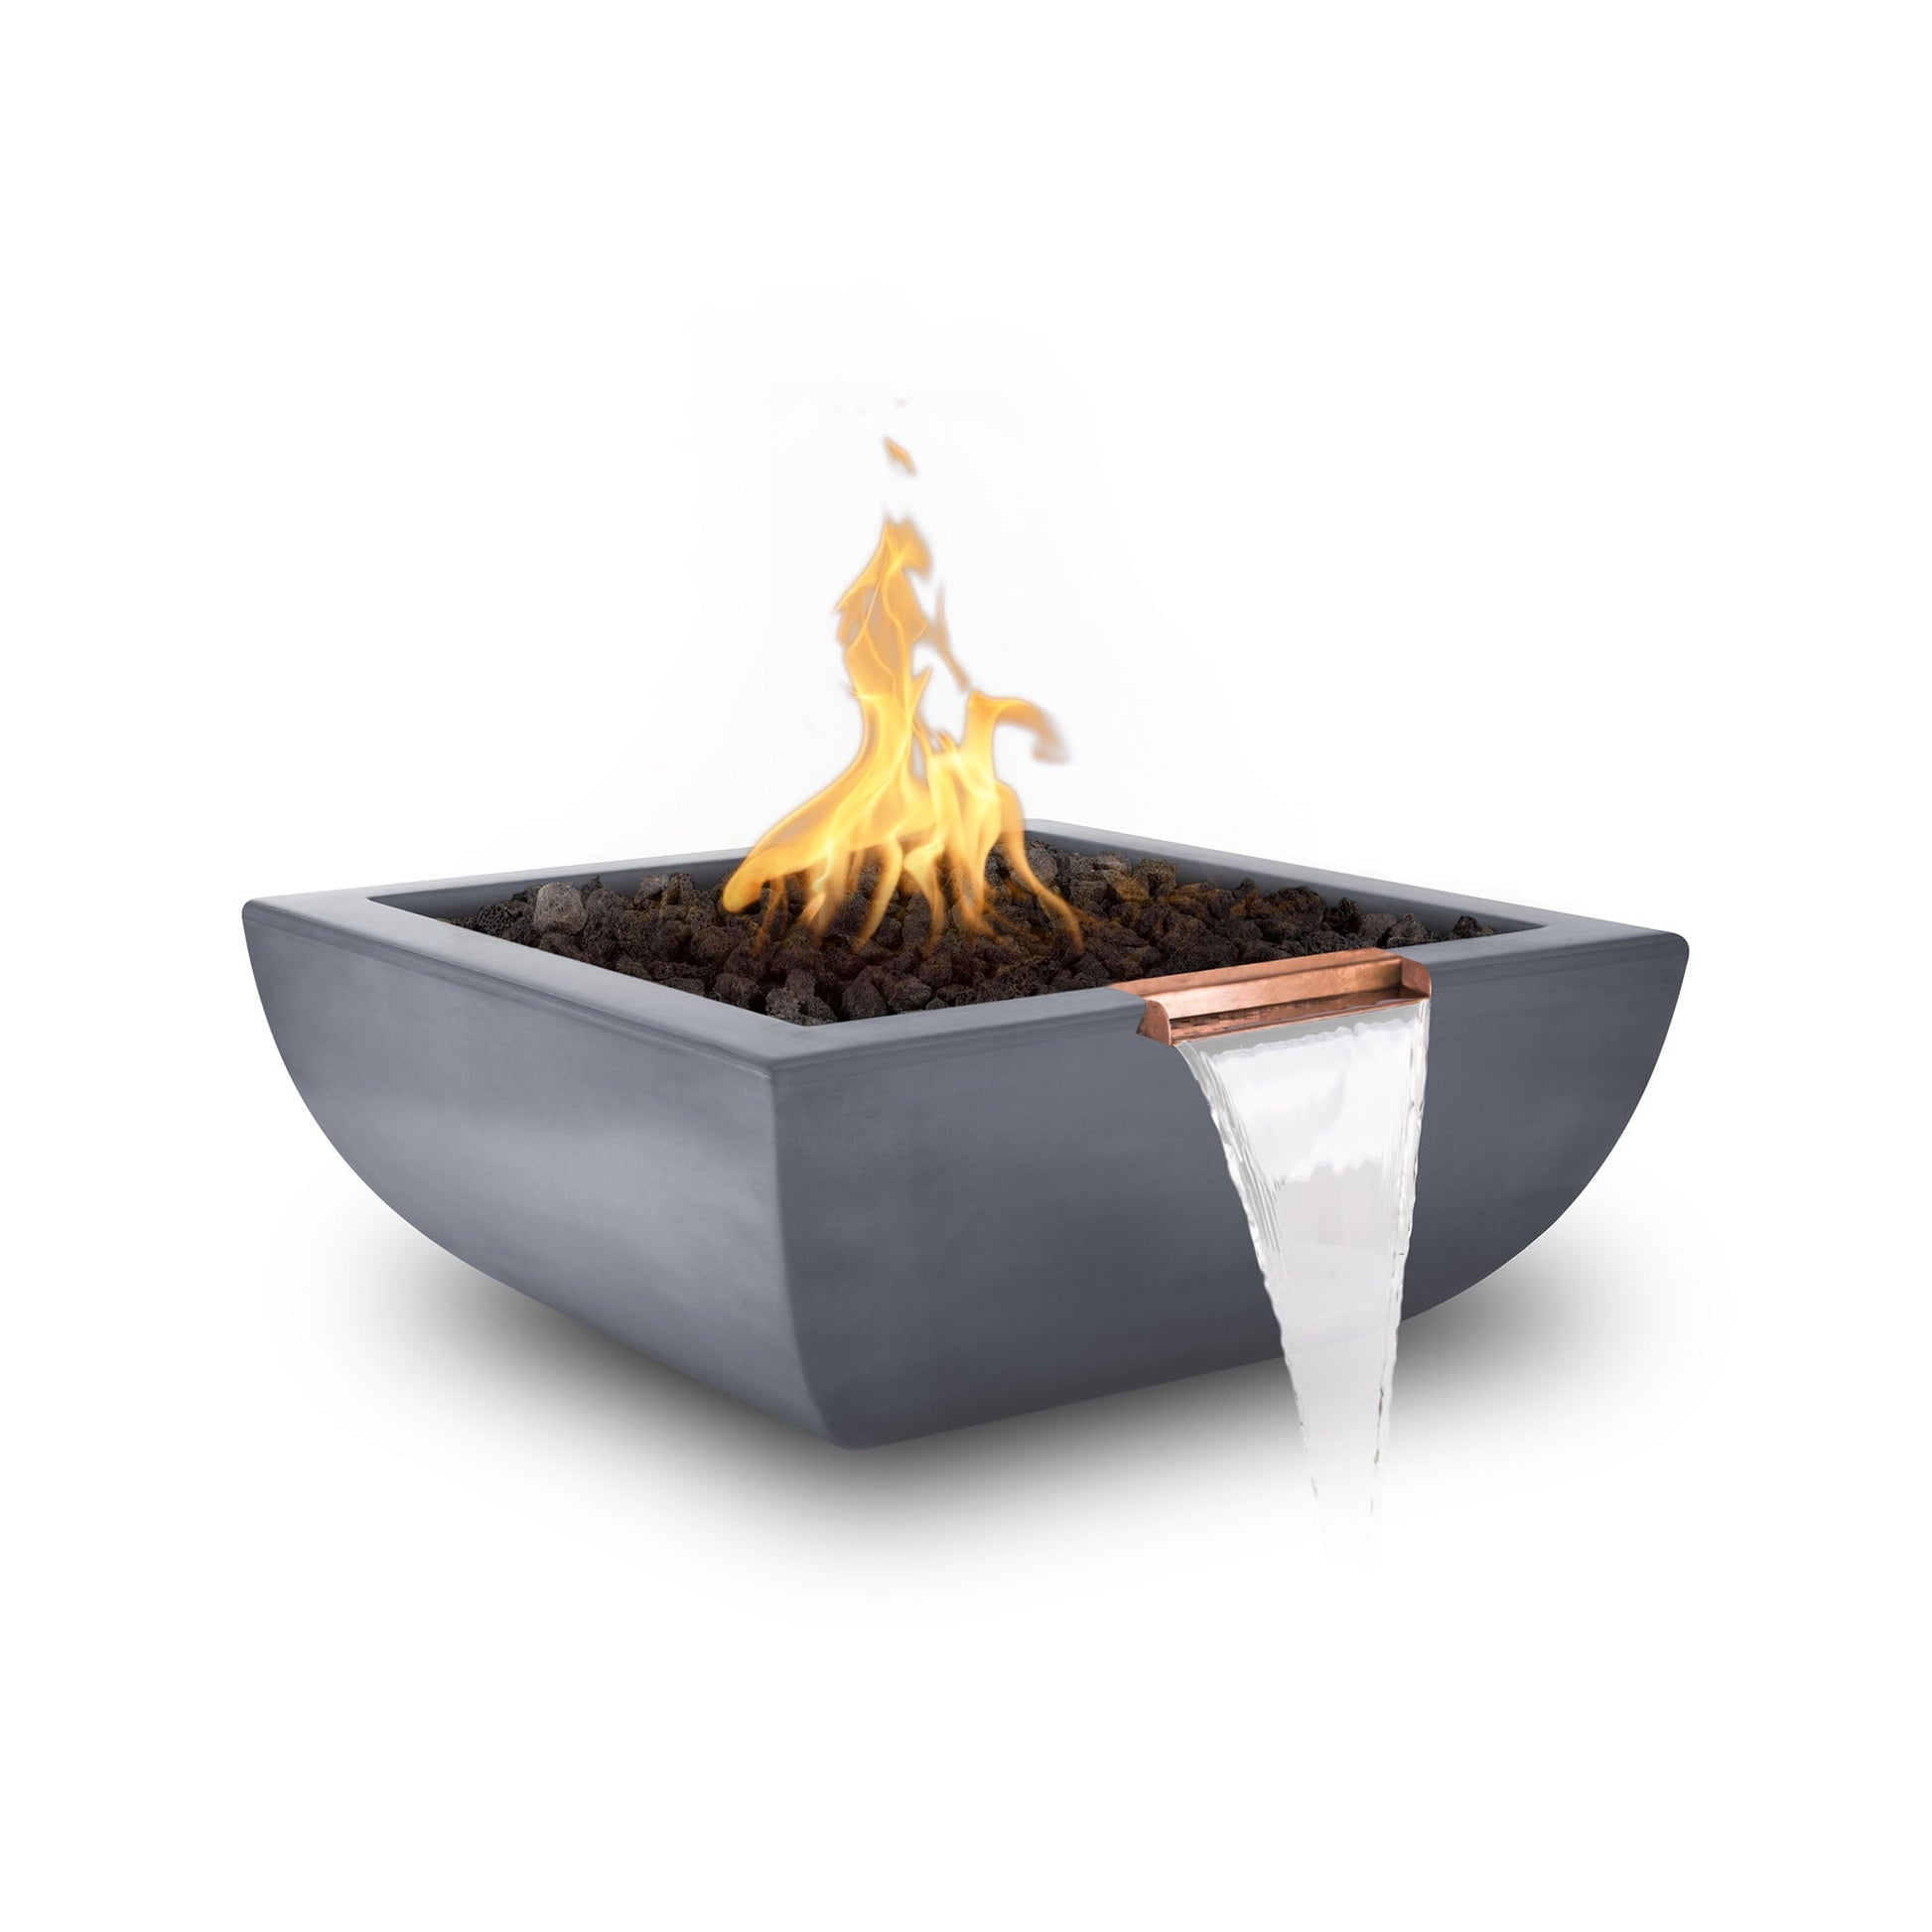 The Outdoor Plus Square Avalon 30" Metallic Pearl GFRC Concrete Liquid Propane Fire & Water Bowl with Match Lit with Flame Sense Ignition